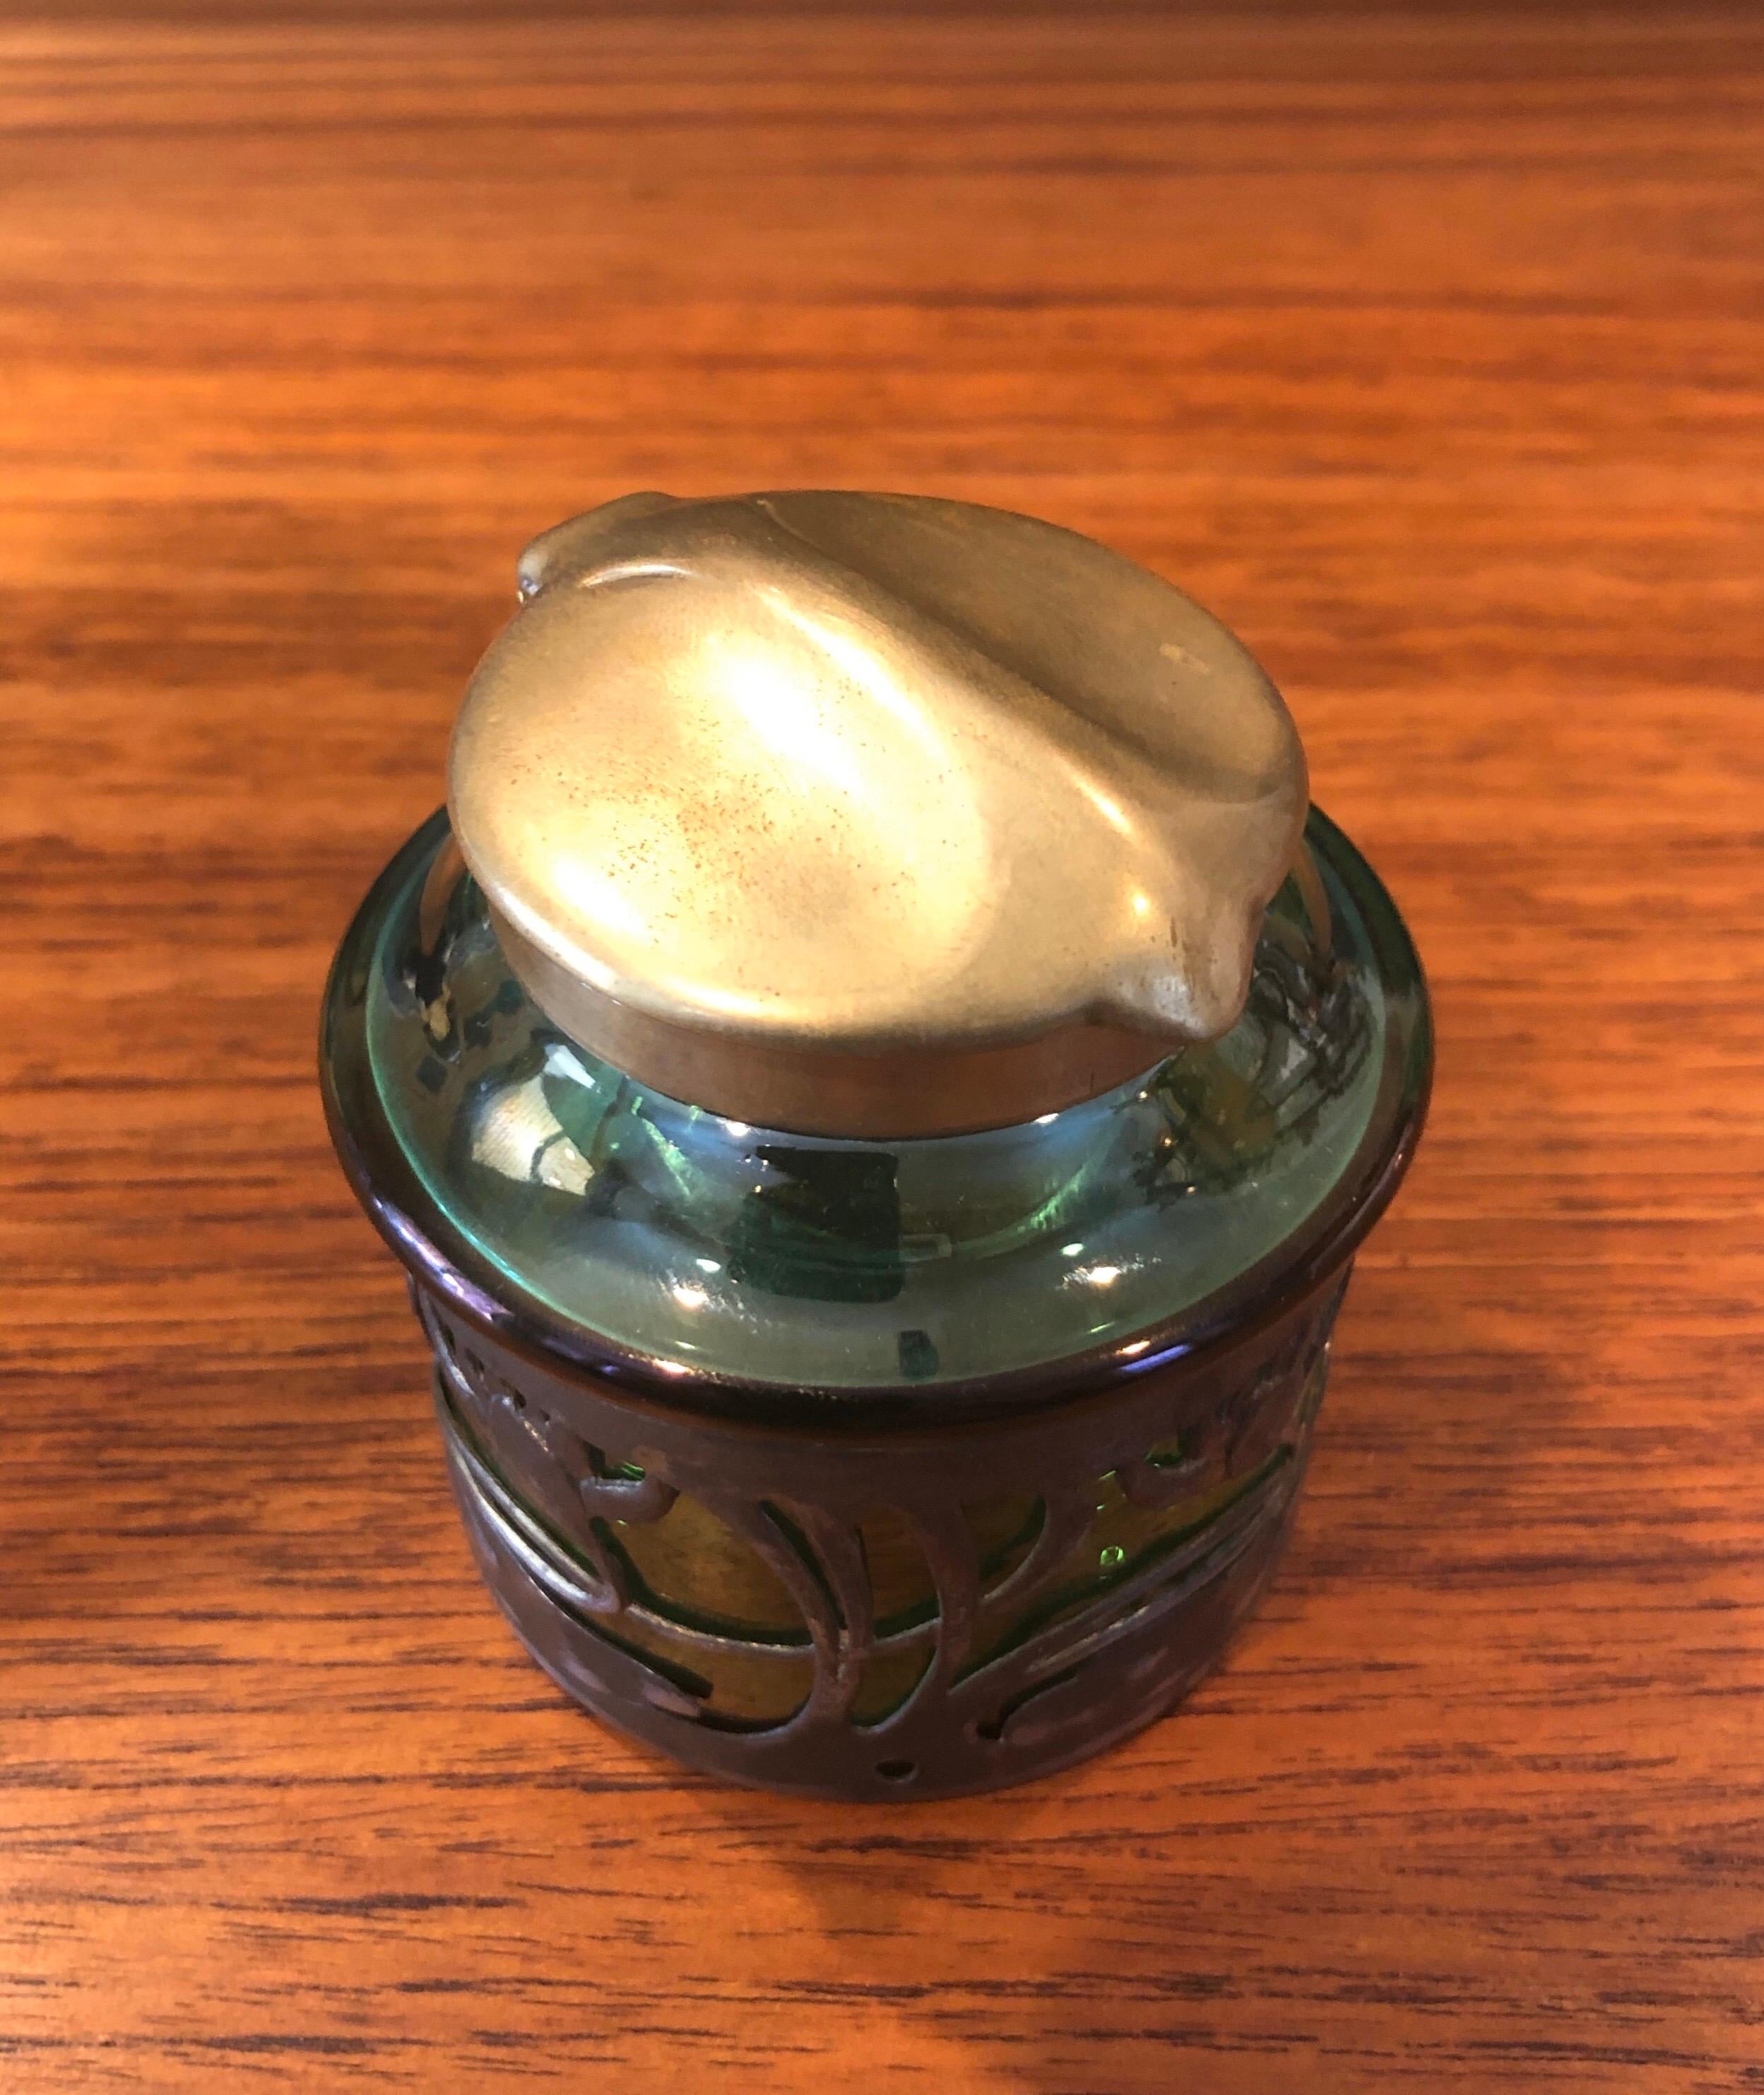 Stunning Bohemian Czech Art Nouveau inkwell with metal water lily overlay in the style of Loetz, circa 1900s. The green art glass well is capped with a gorgeous brass leaf motif lid and rim (there is a serial # or model # in the underside of the